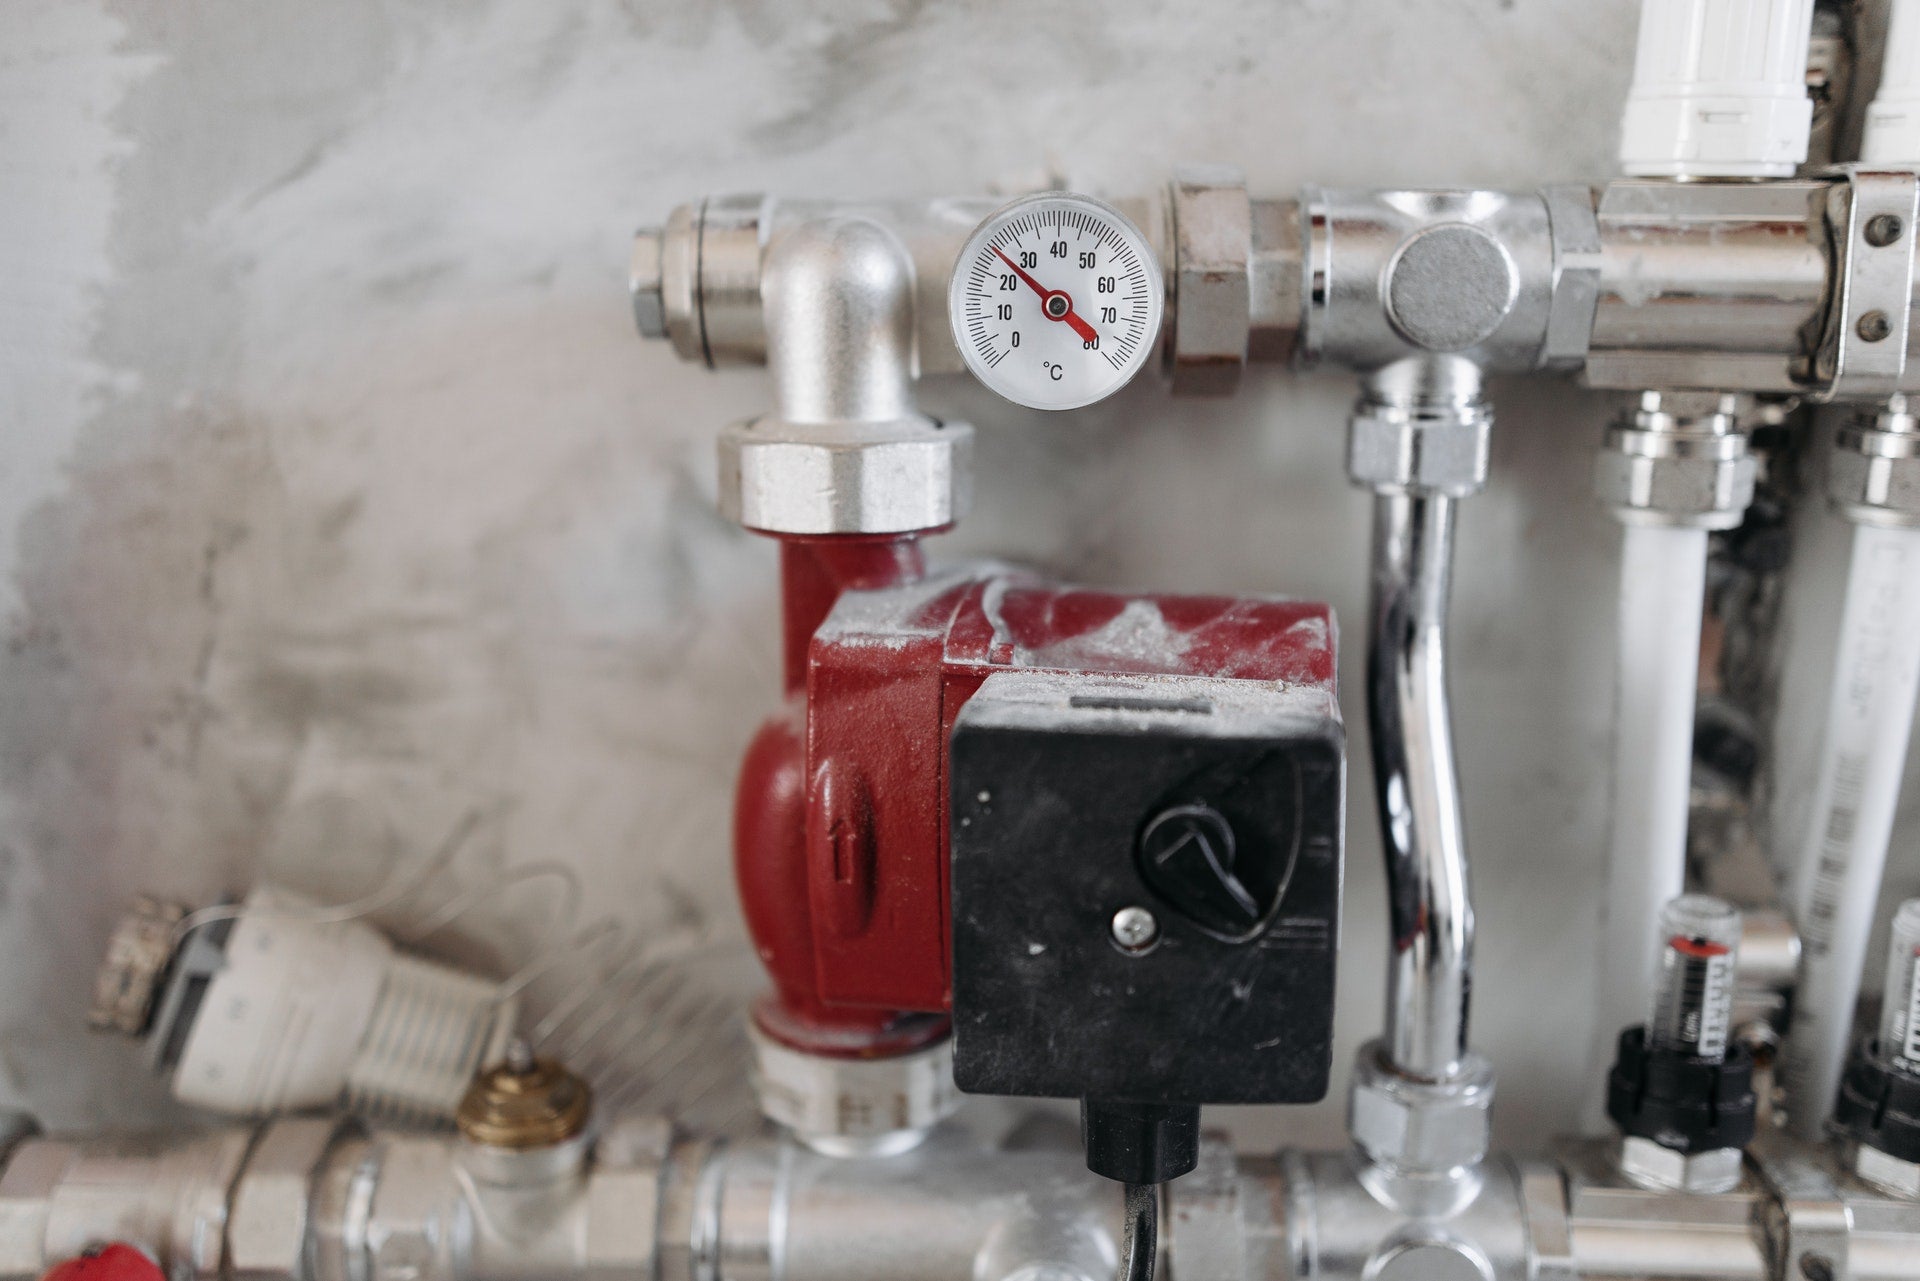 How To Clean Your Water Softener Tank?